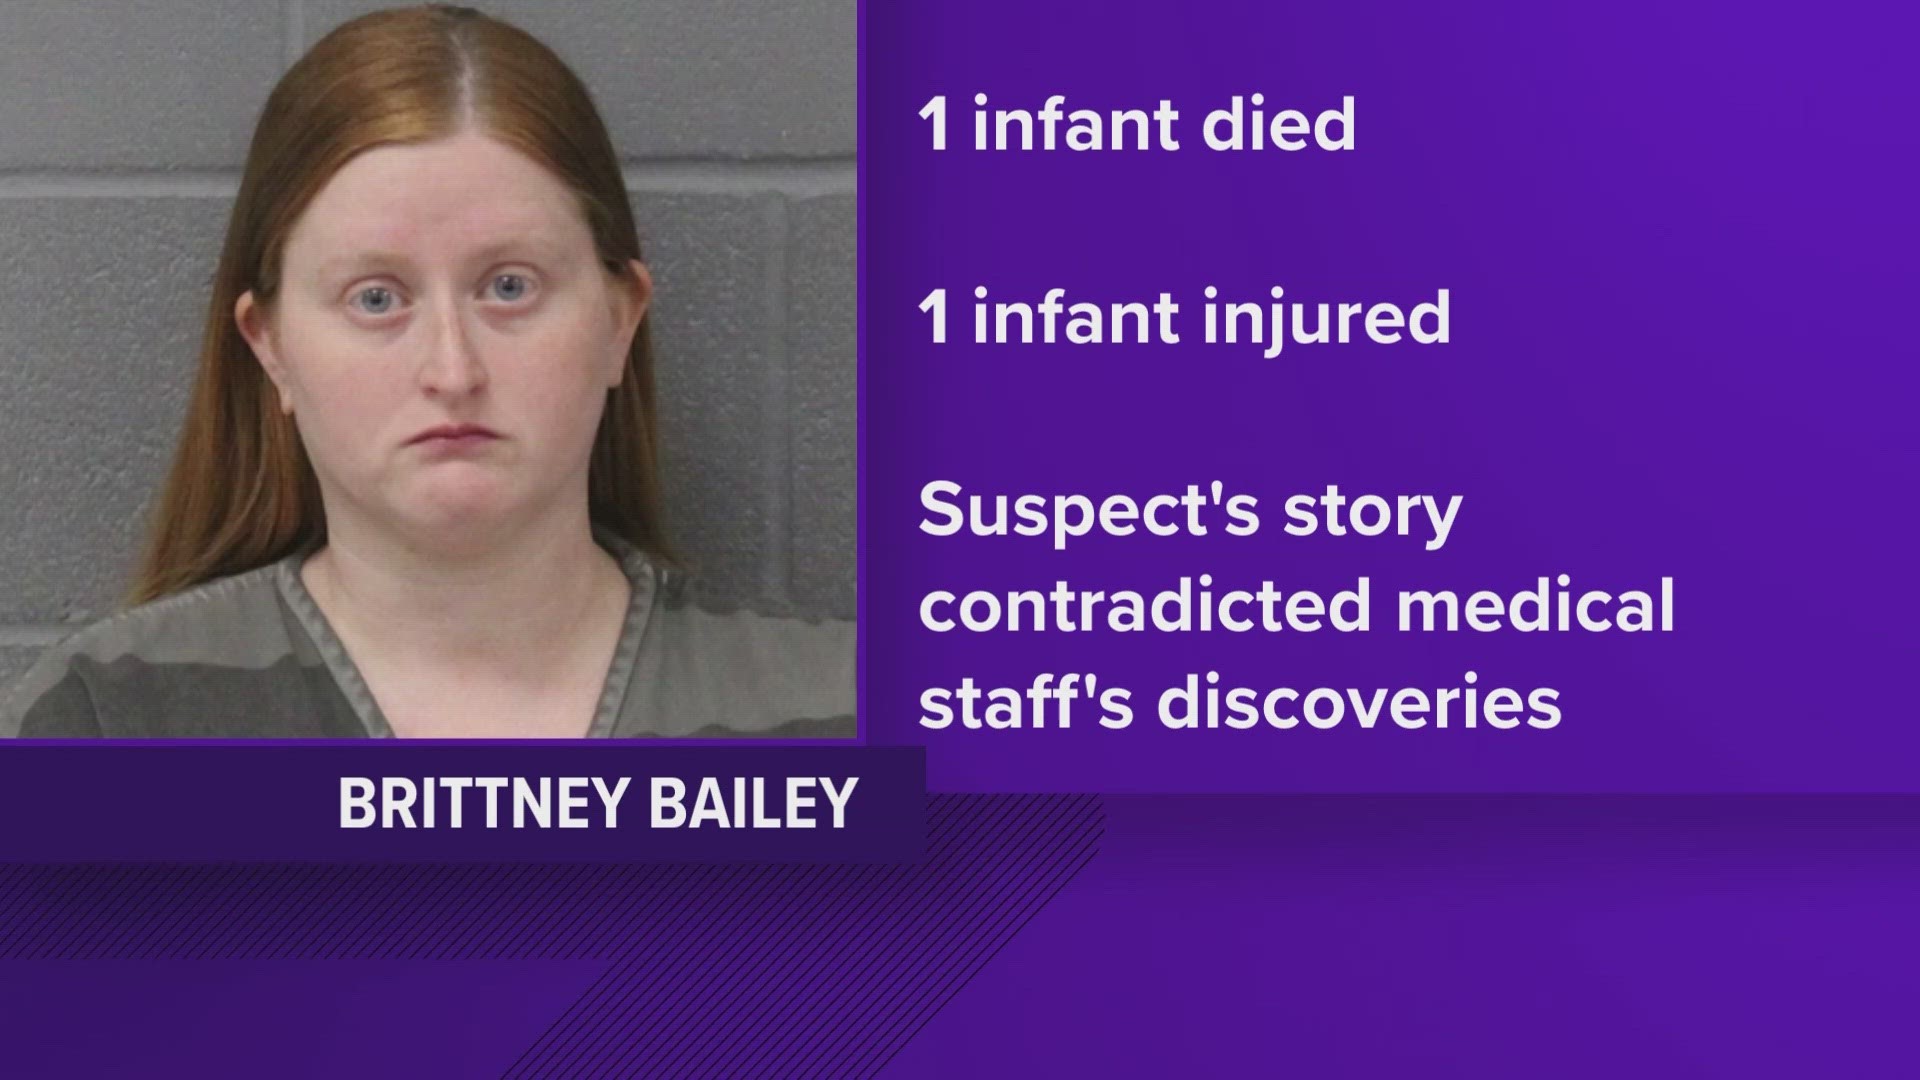 We're learning more details about what led police to arrest an Austin mother after her 3-month-old daughter's death.